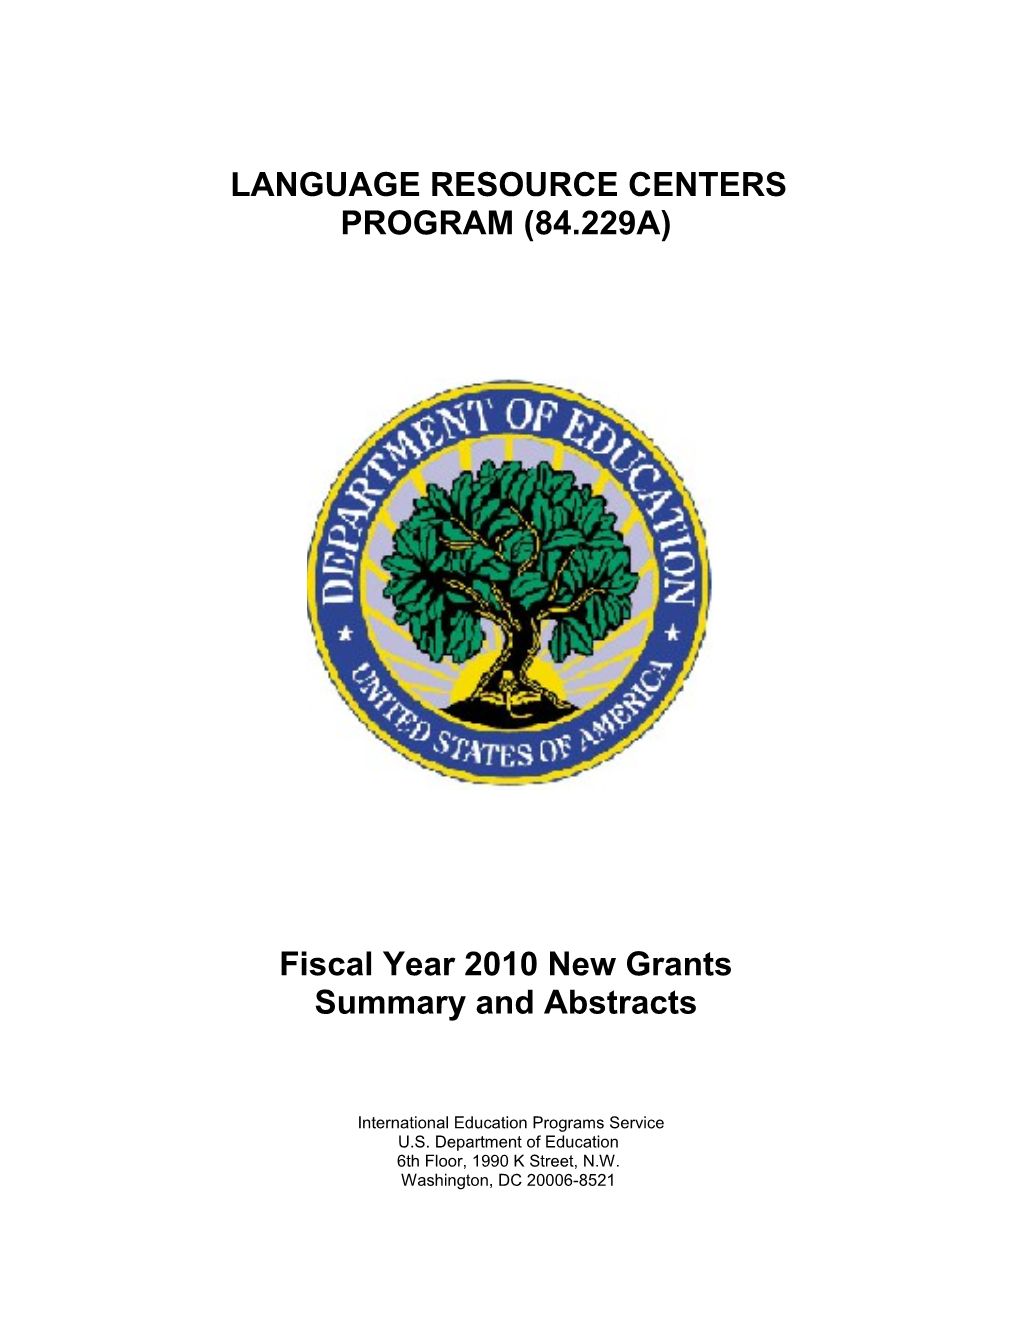 FY 2010 Language Resource Centers Program - Abstracts of Funded Projects (MS Word)